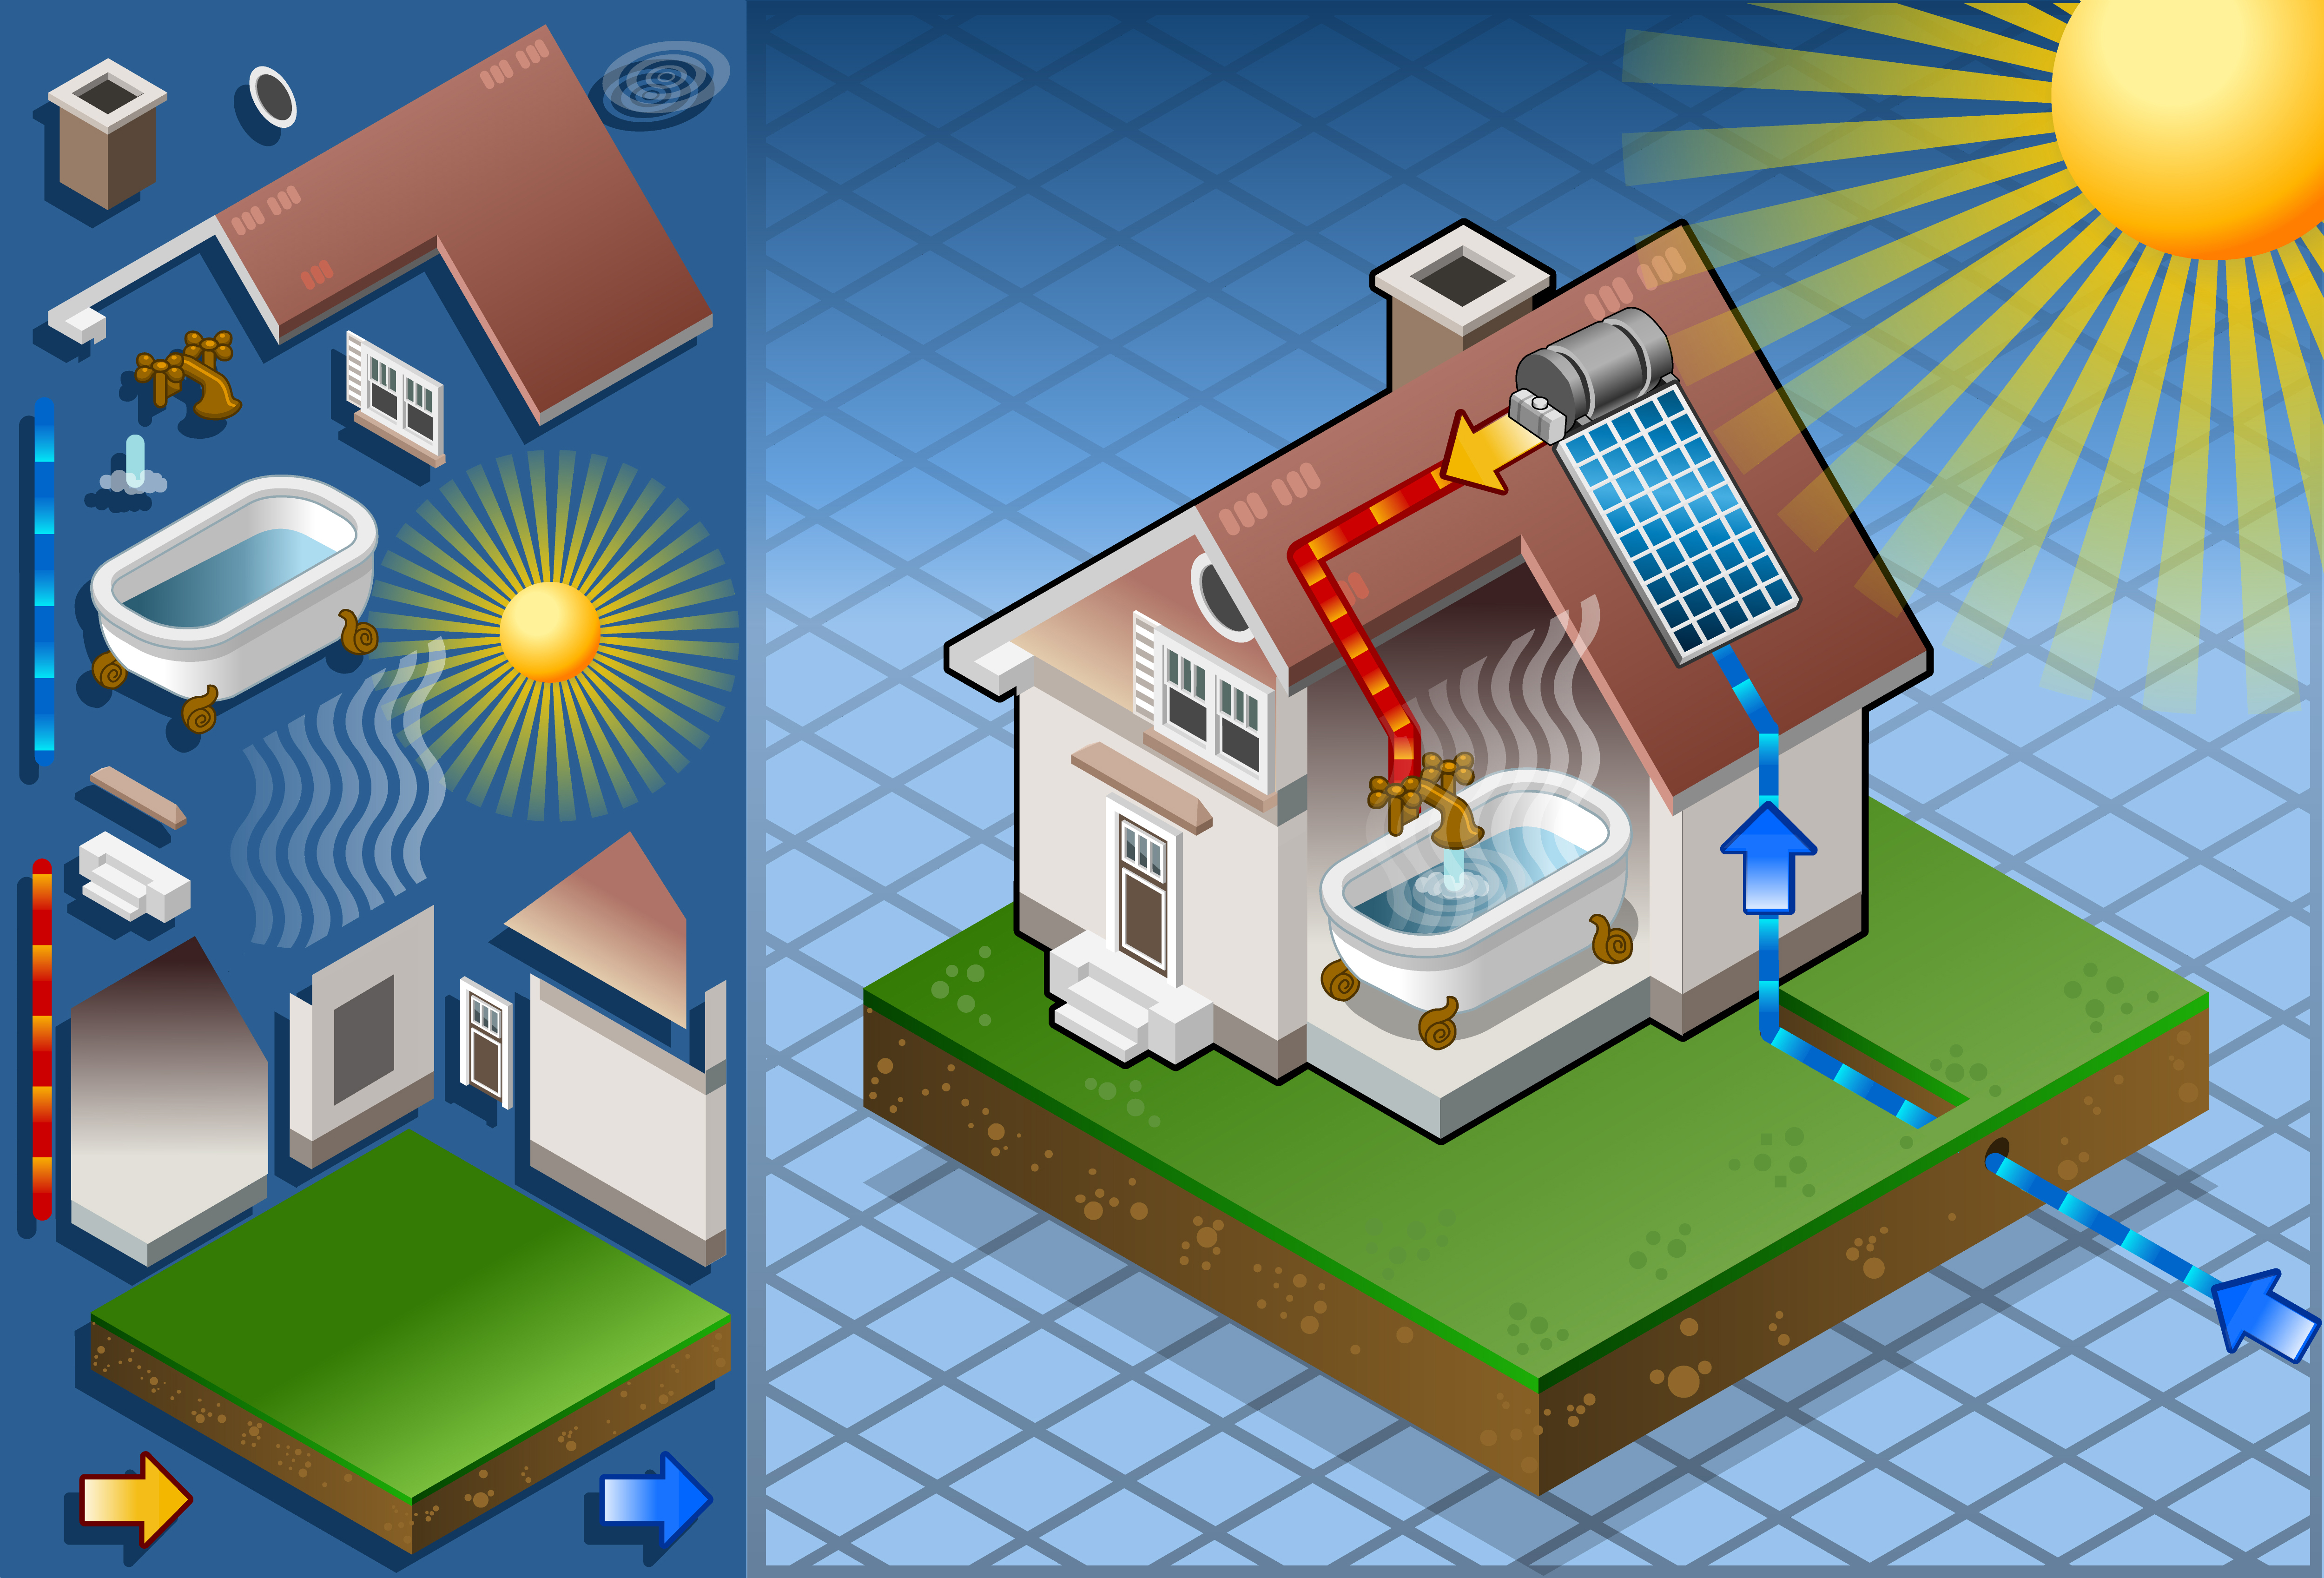 Solar Panels. Use the sun's energy for free hot water & power